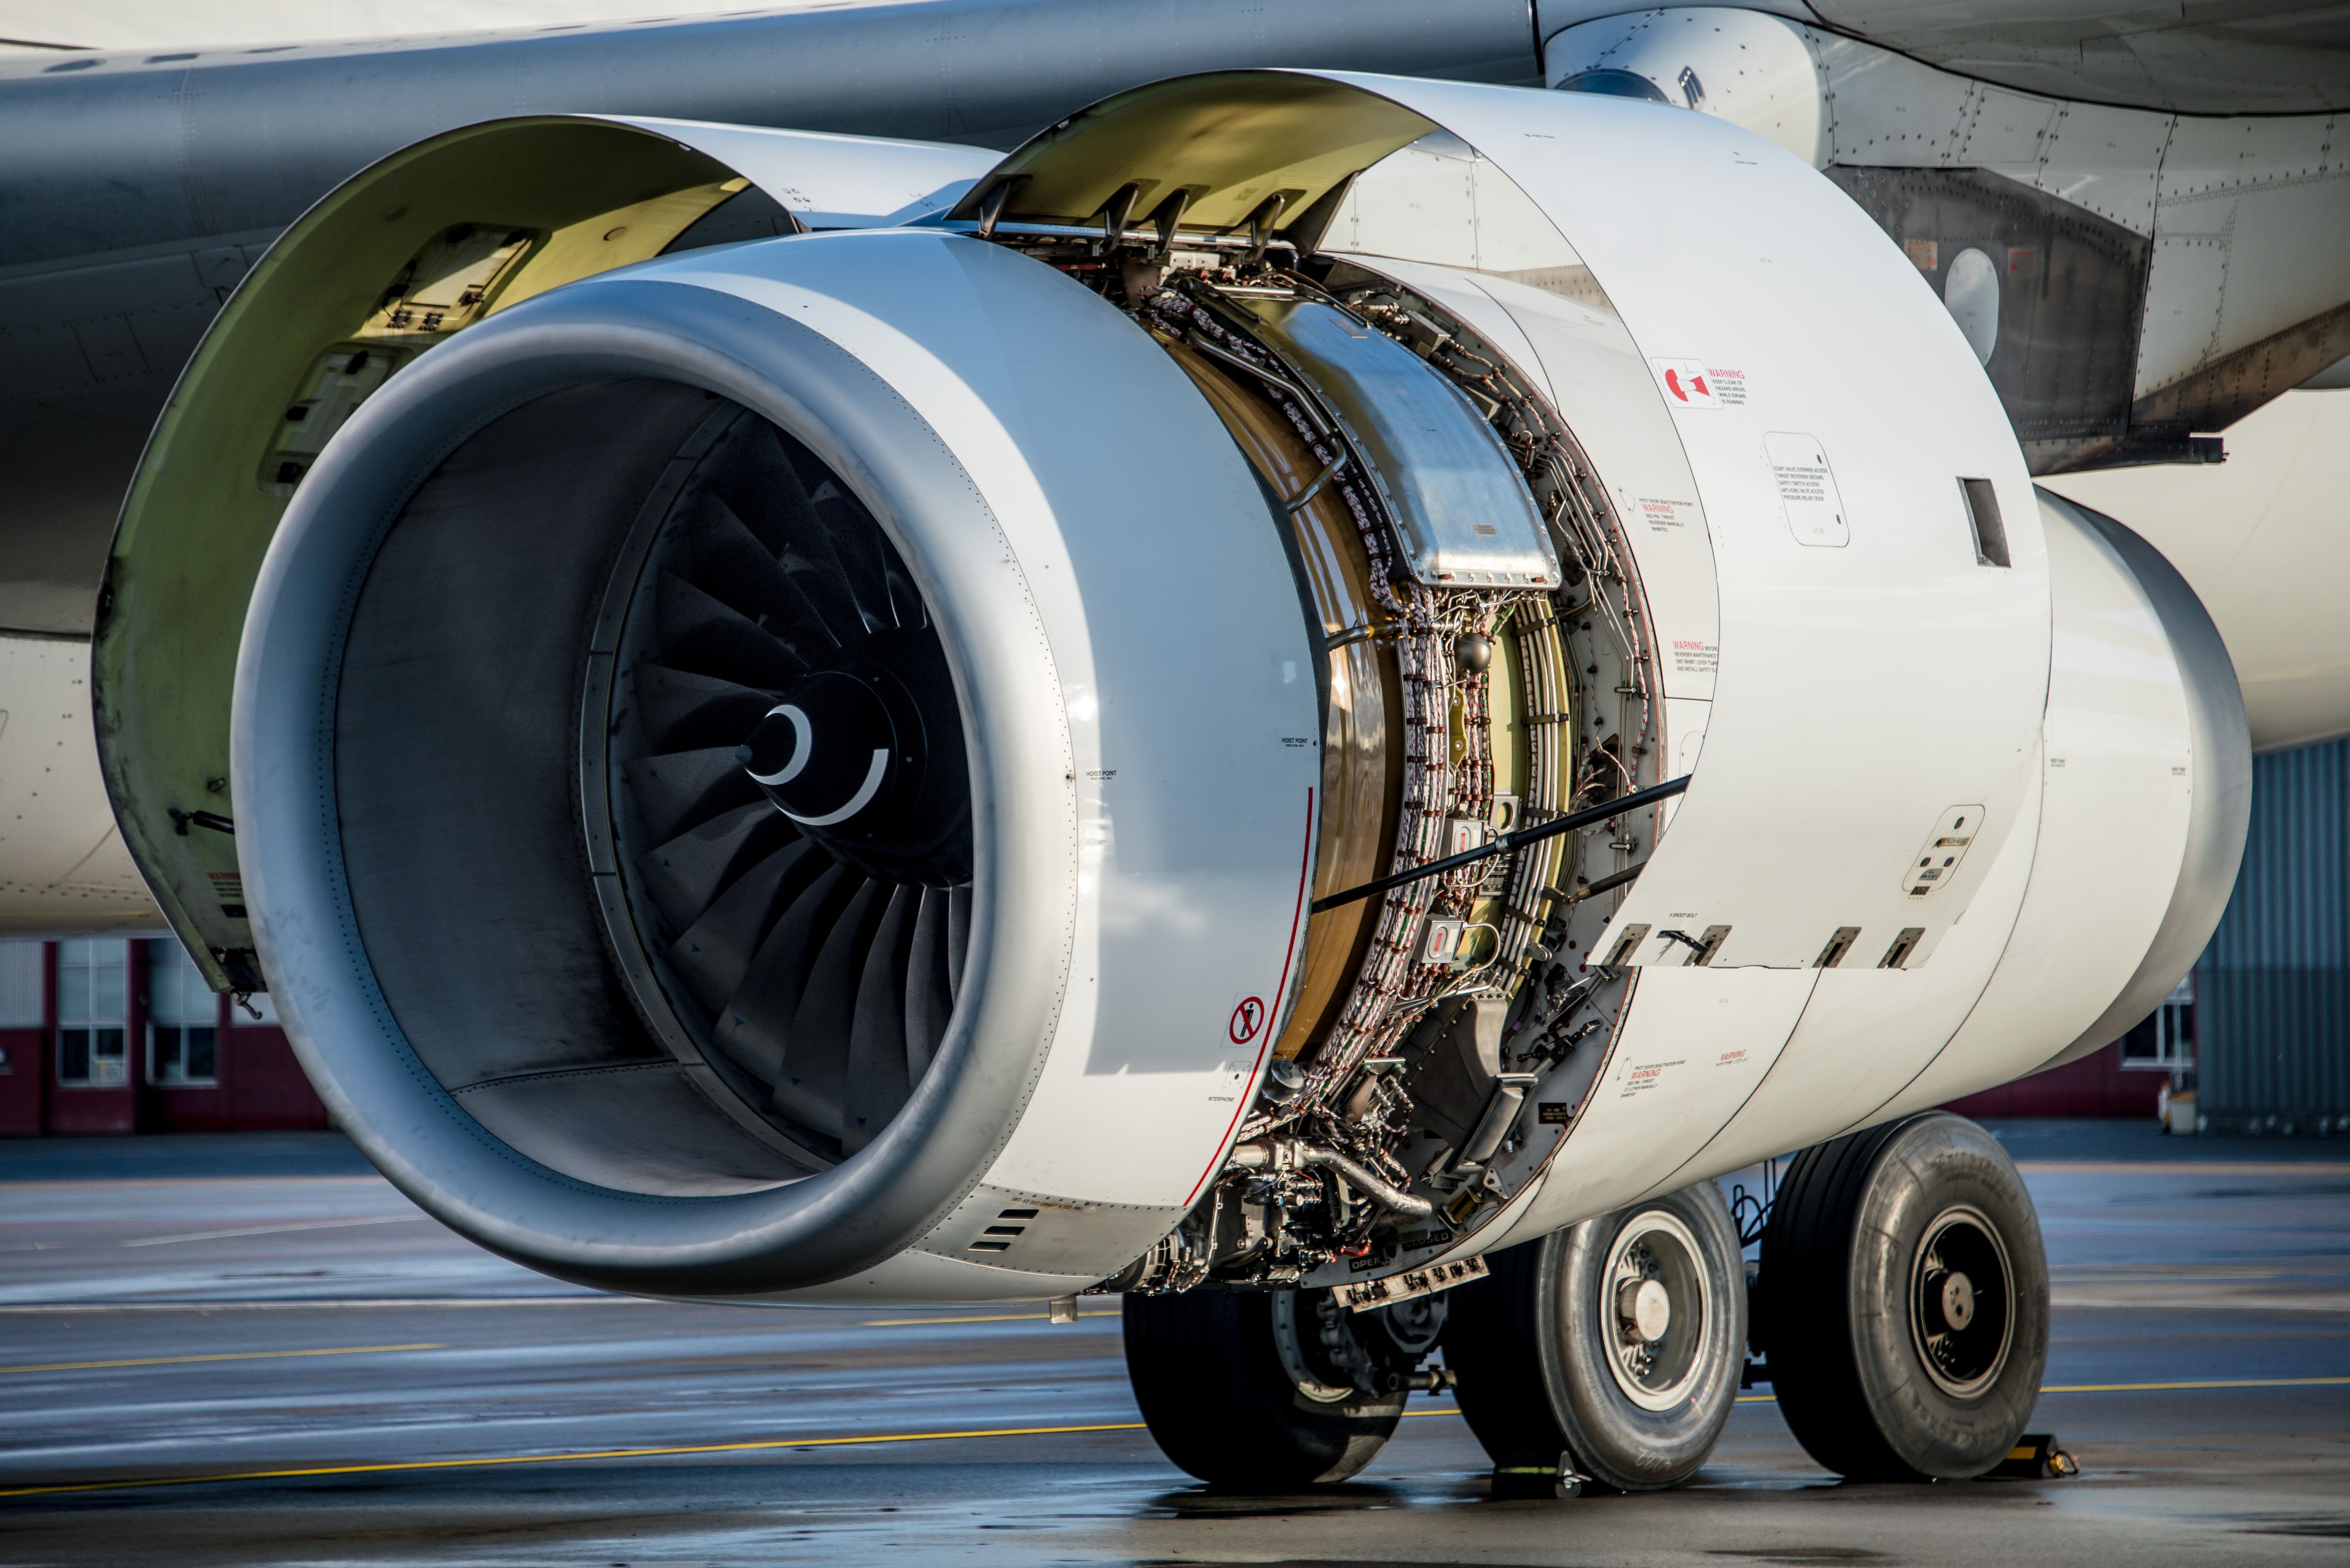 Airliner engine with open cowlings.